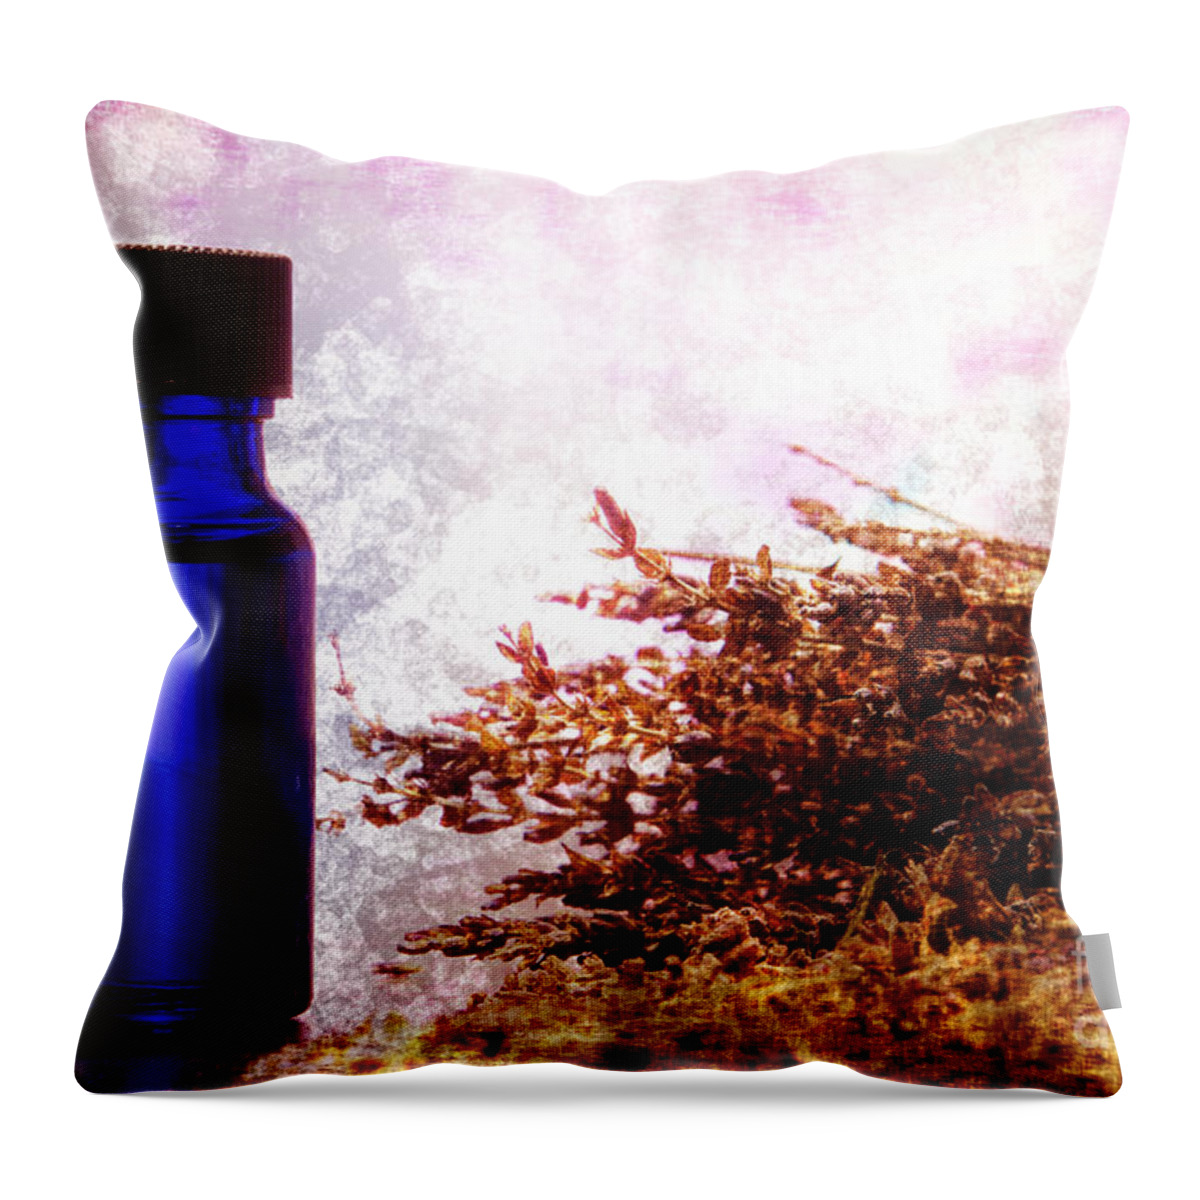 Aromatherapy Throw Pillow featuring the photograph Lavender Essential Oil Bottle by Olivier Le Queinec